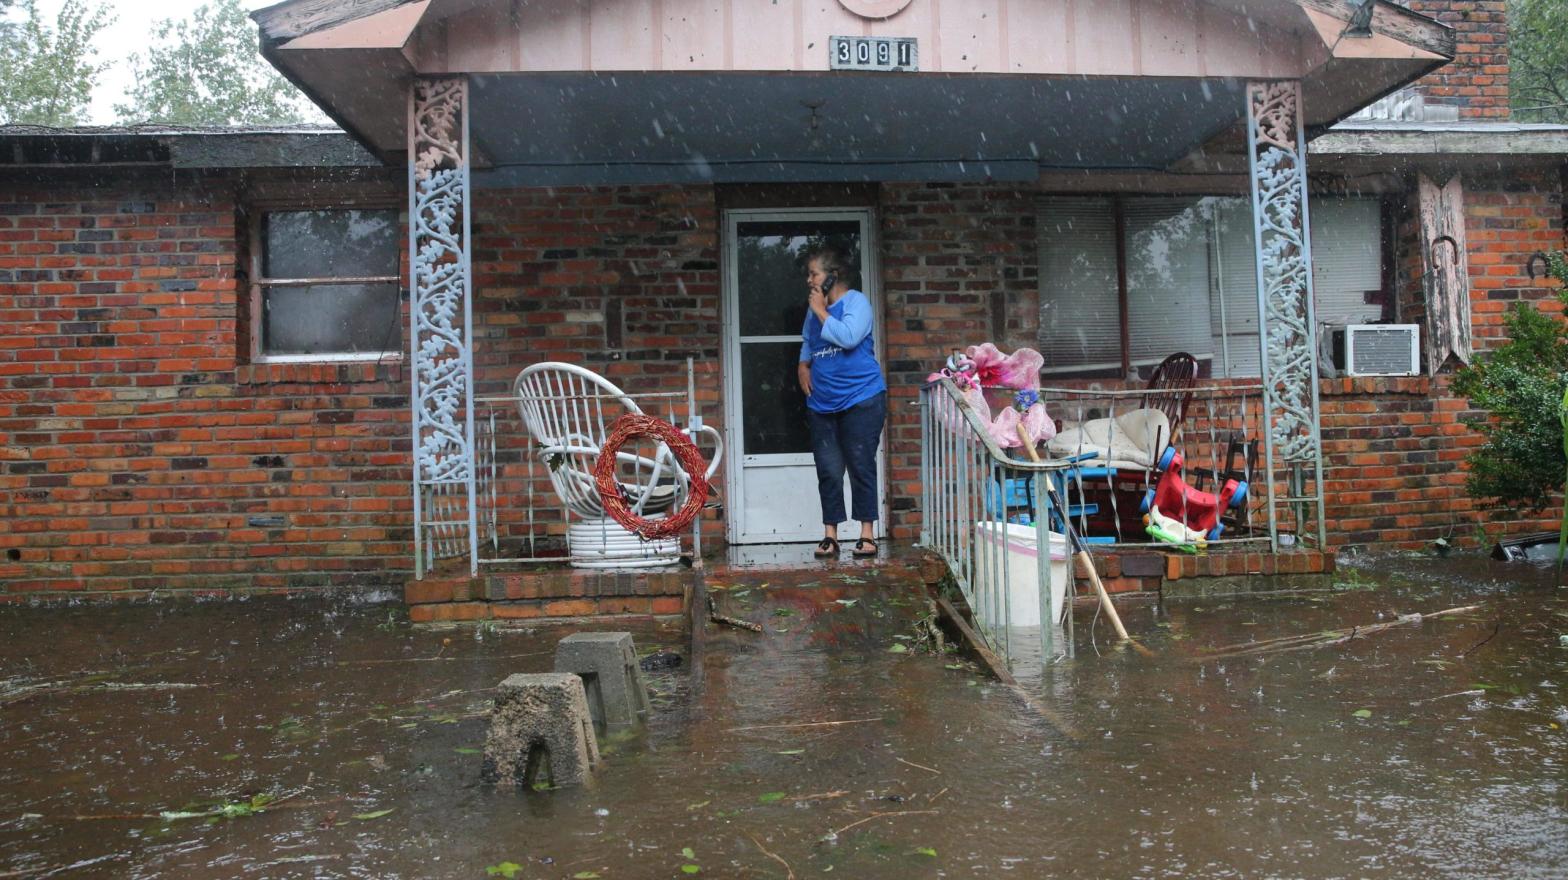 A woman on mobile phone calls for help at her flooded residence in Lumberton, North Carolina, on Sept. 15, 2018 in the wake of Hurricane Florence. (Photo: Alex Edelman/AFP, Getty Images)